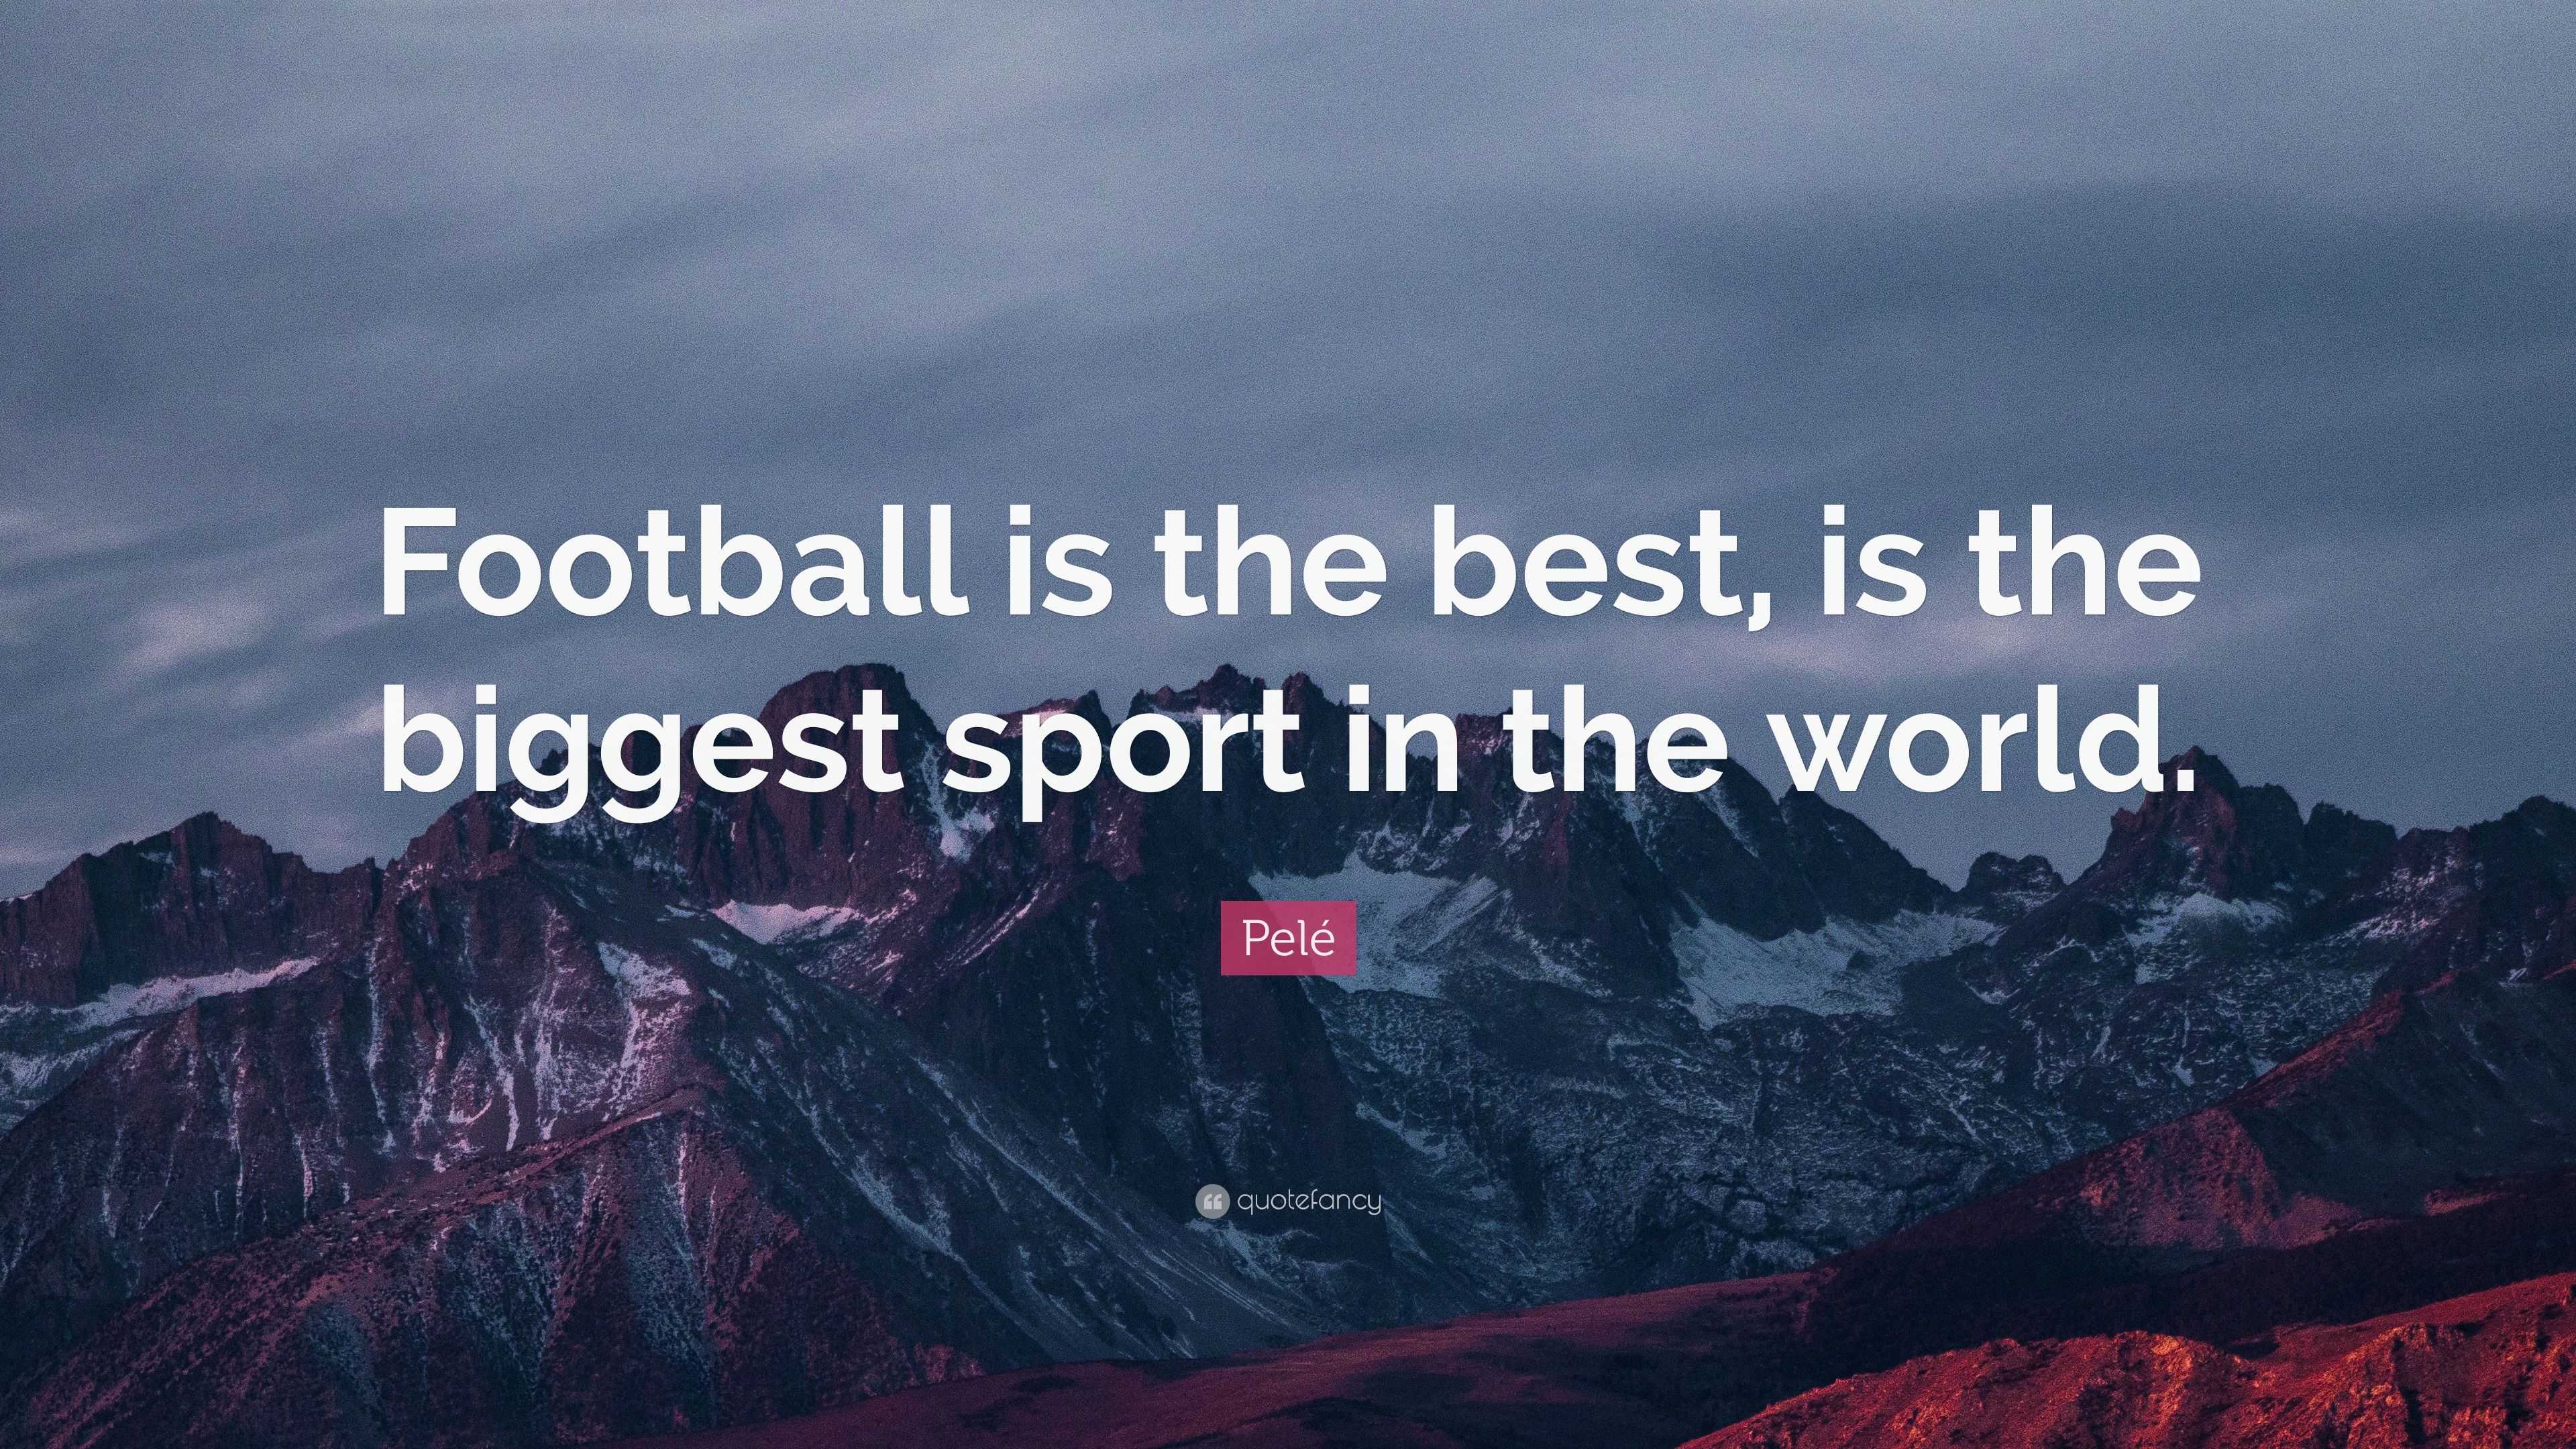 Pelé Quote: “Football is the best, is the biggest sport in the world.”